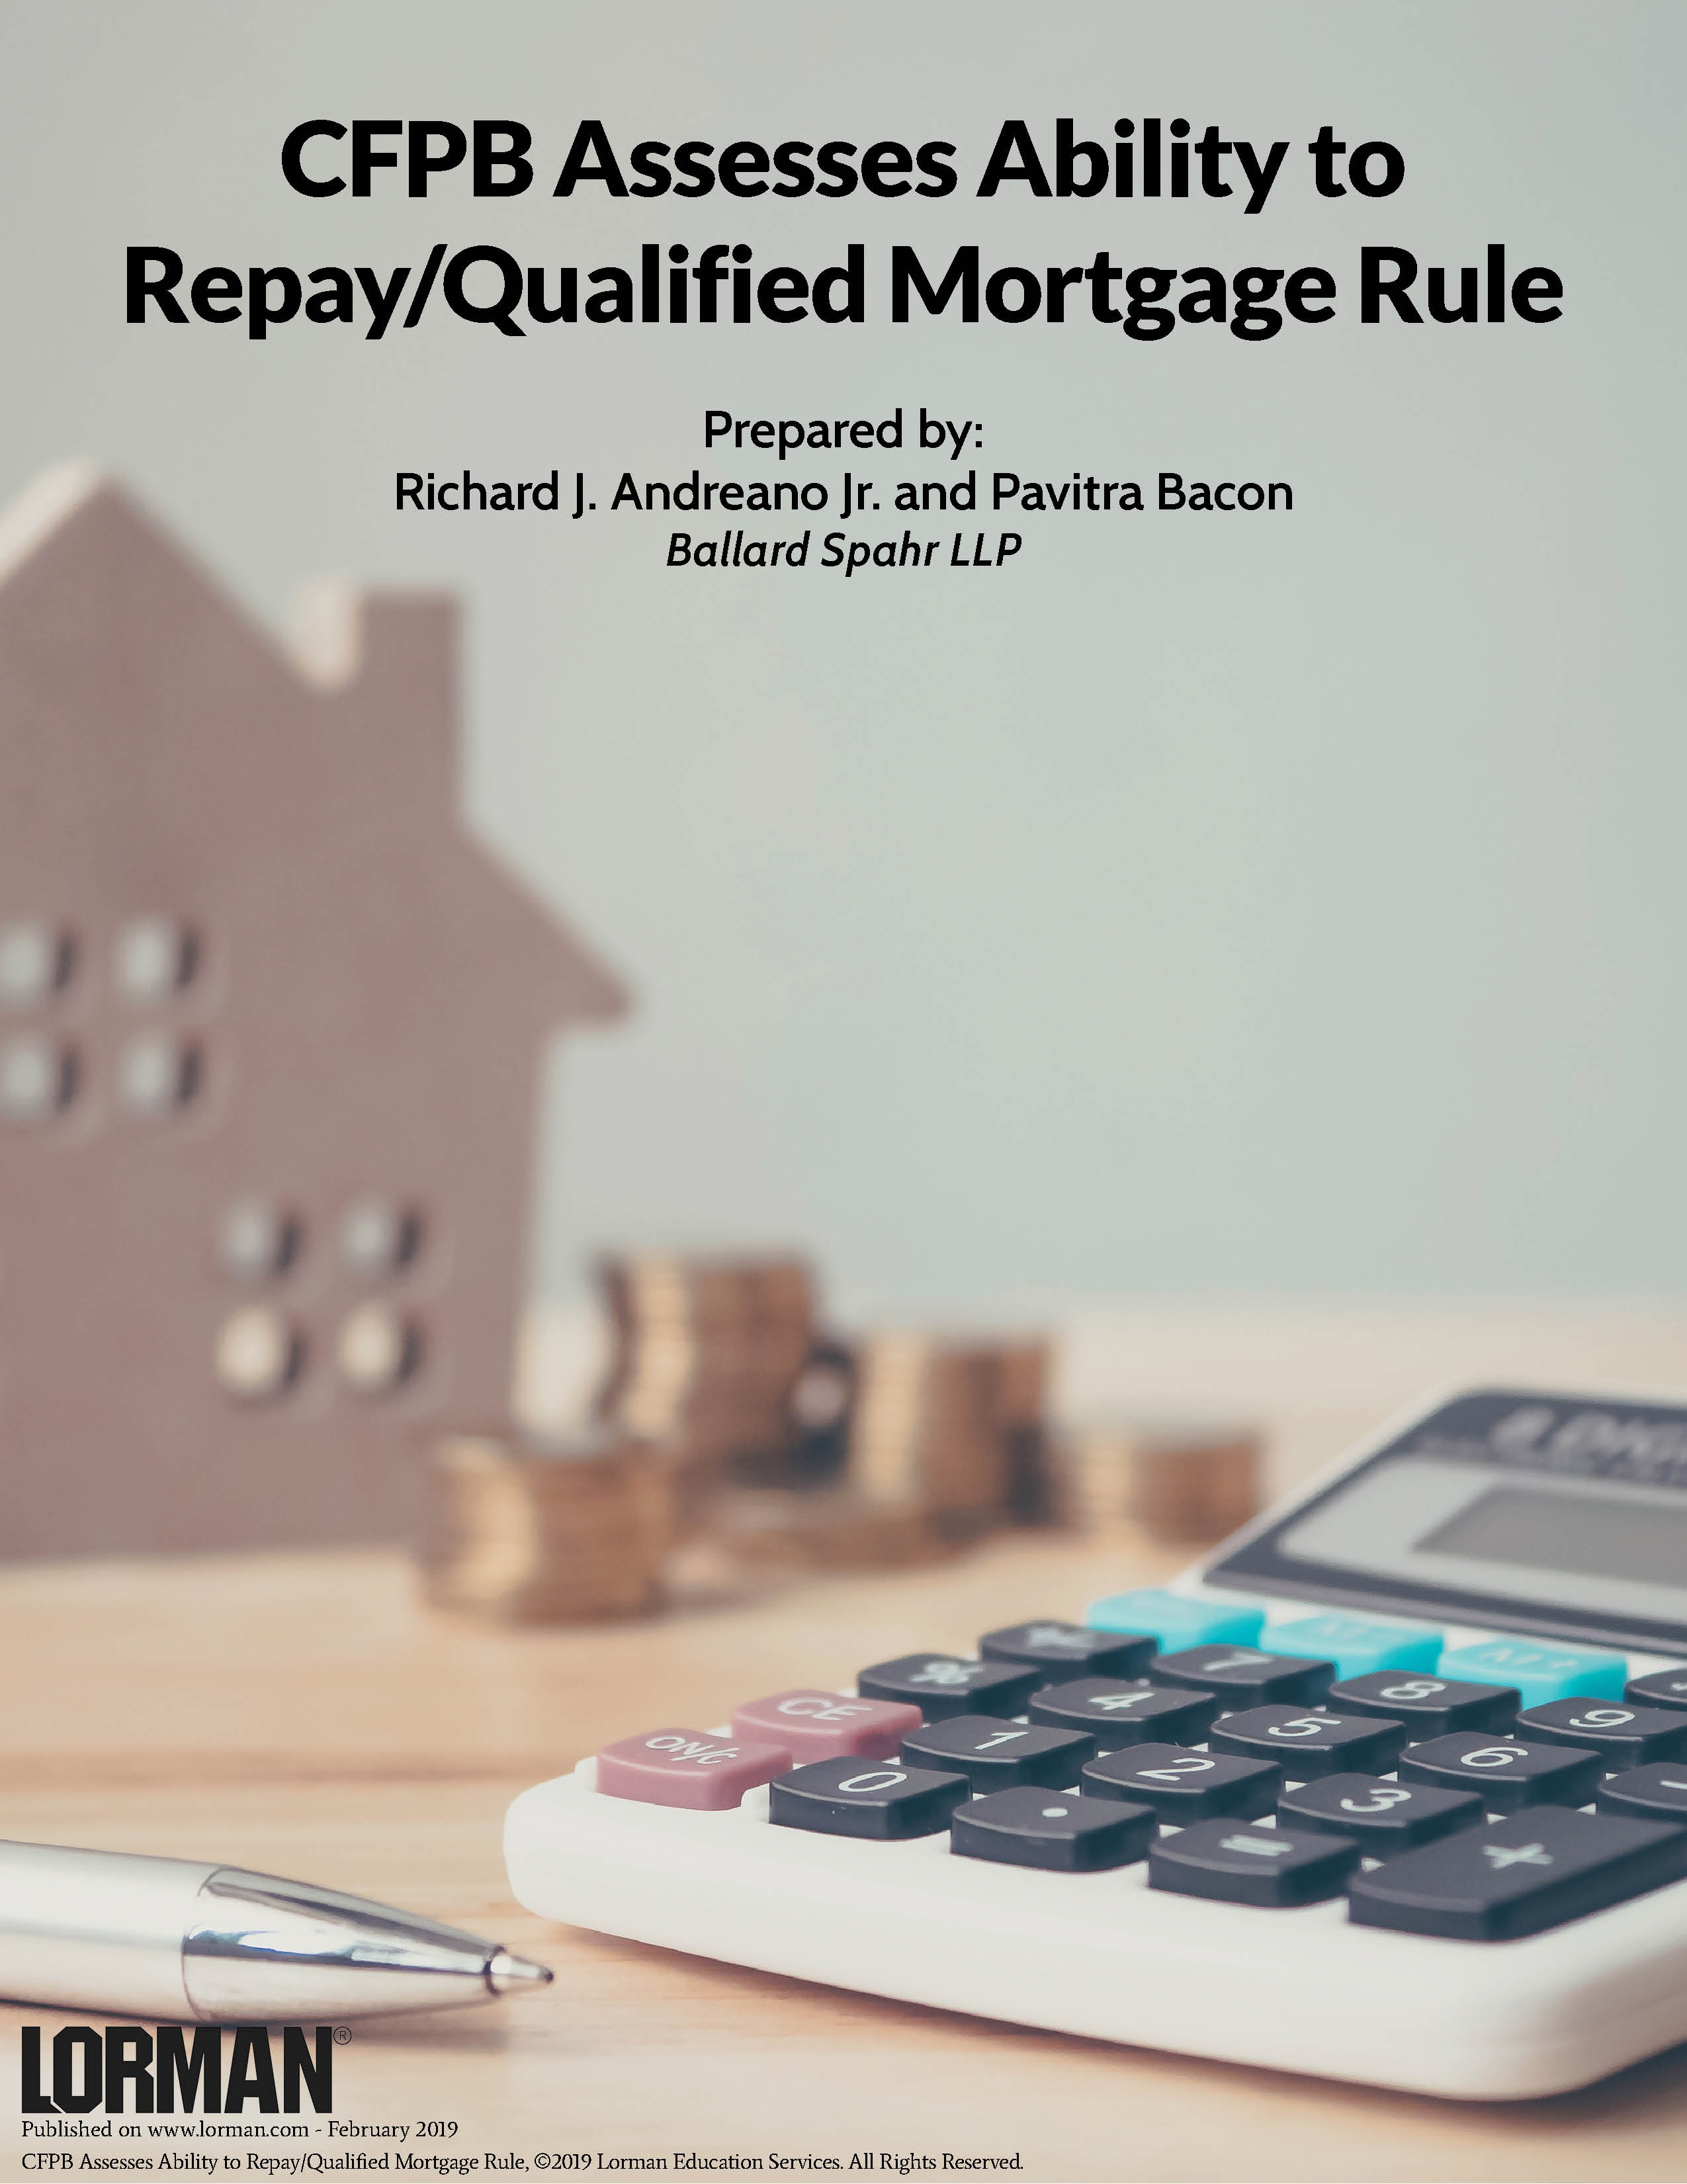 CFPB Assesses Ability to Repay/Qualified Mortgage Rule